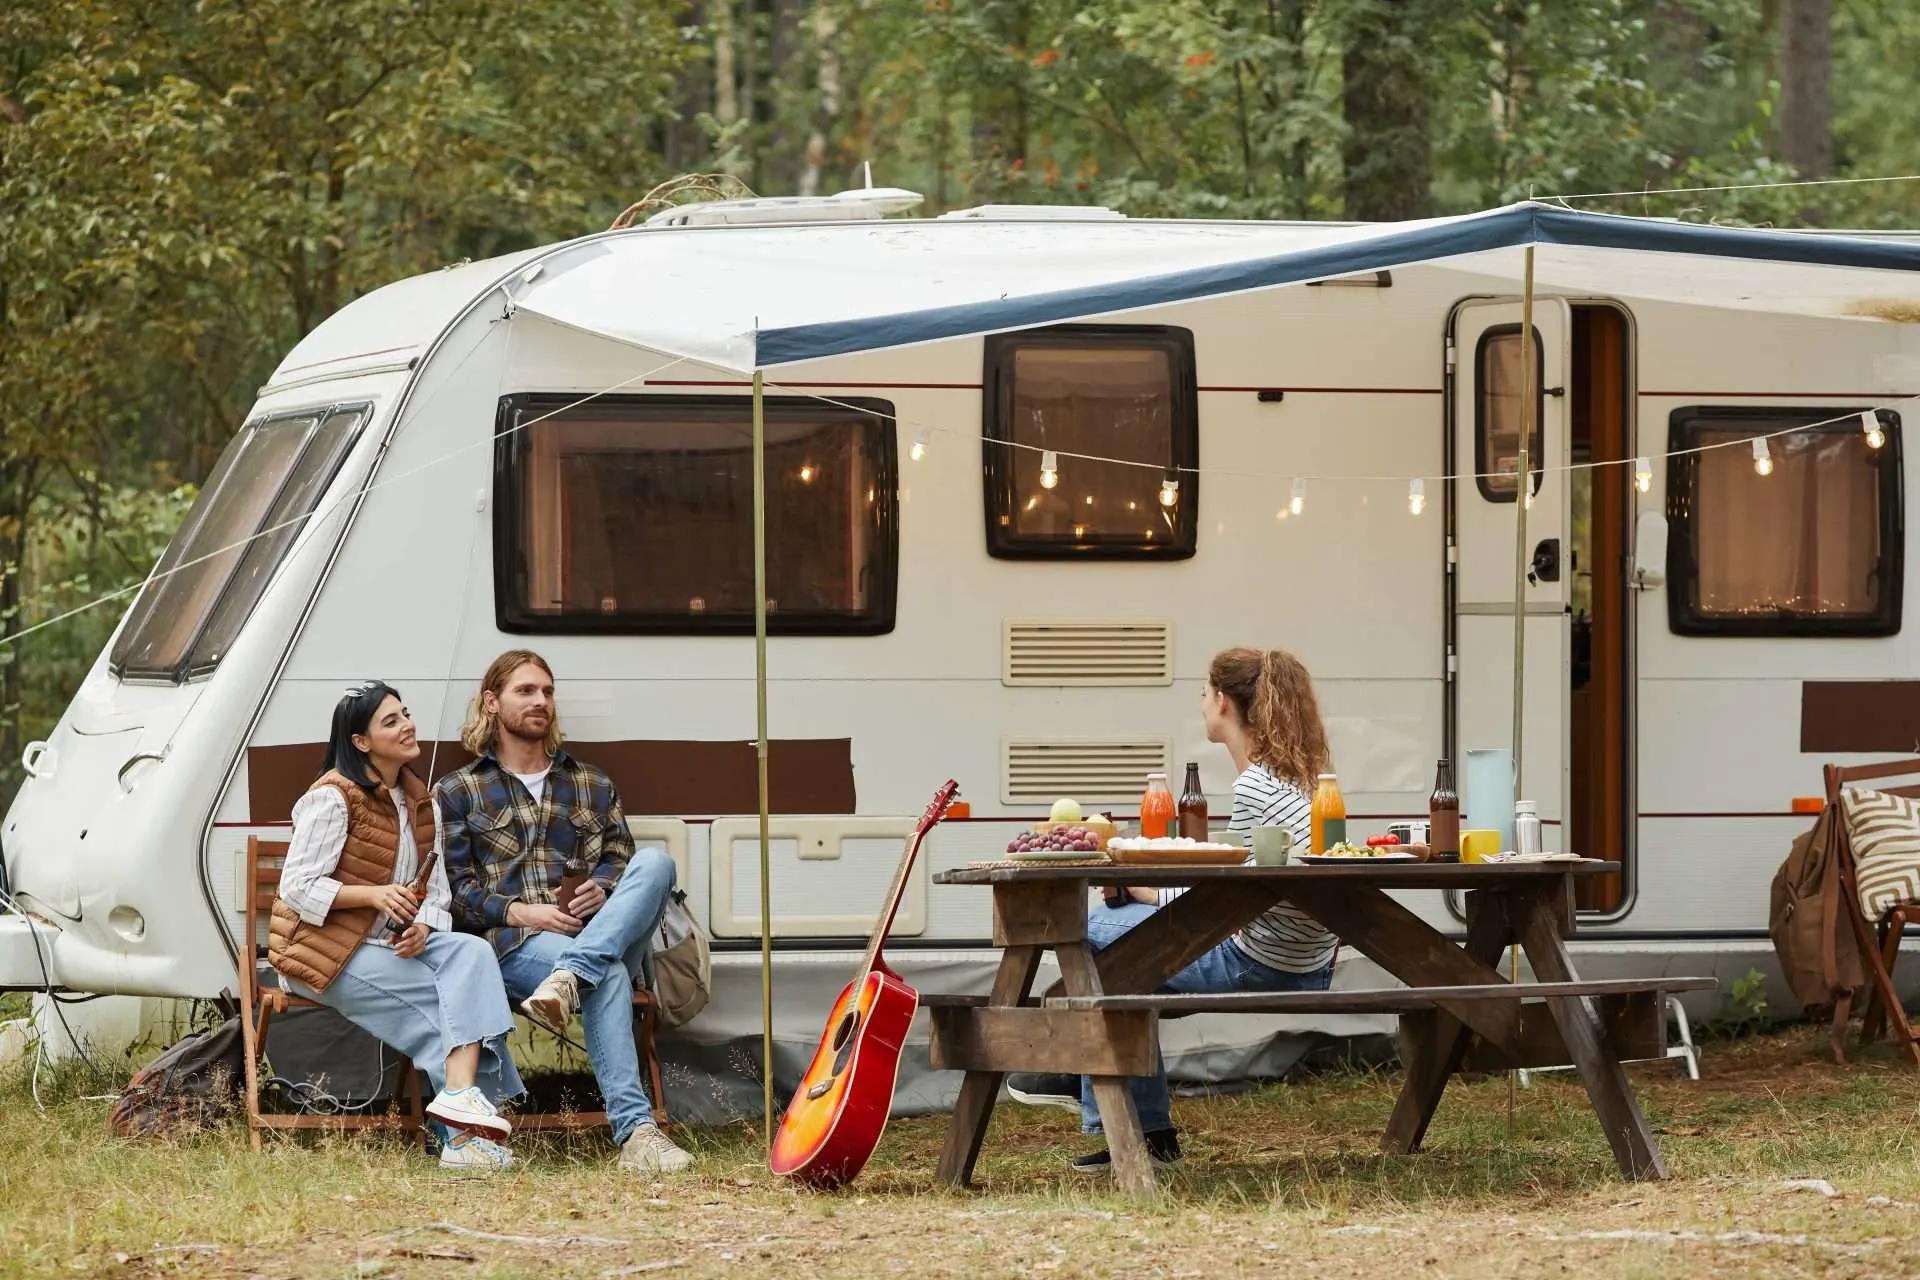 Friends enjoying a picnic in front of RV at campground